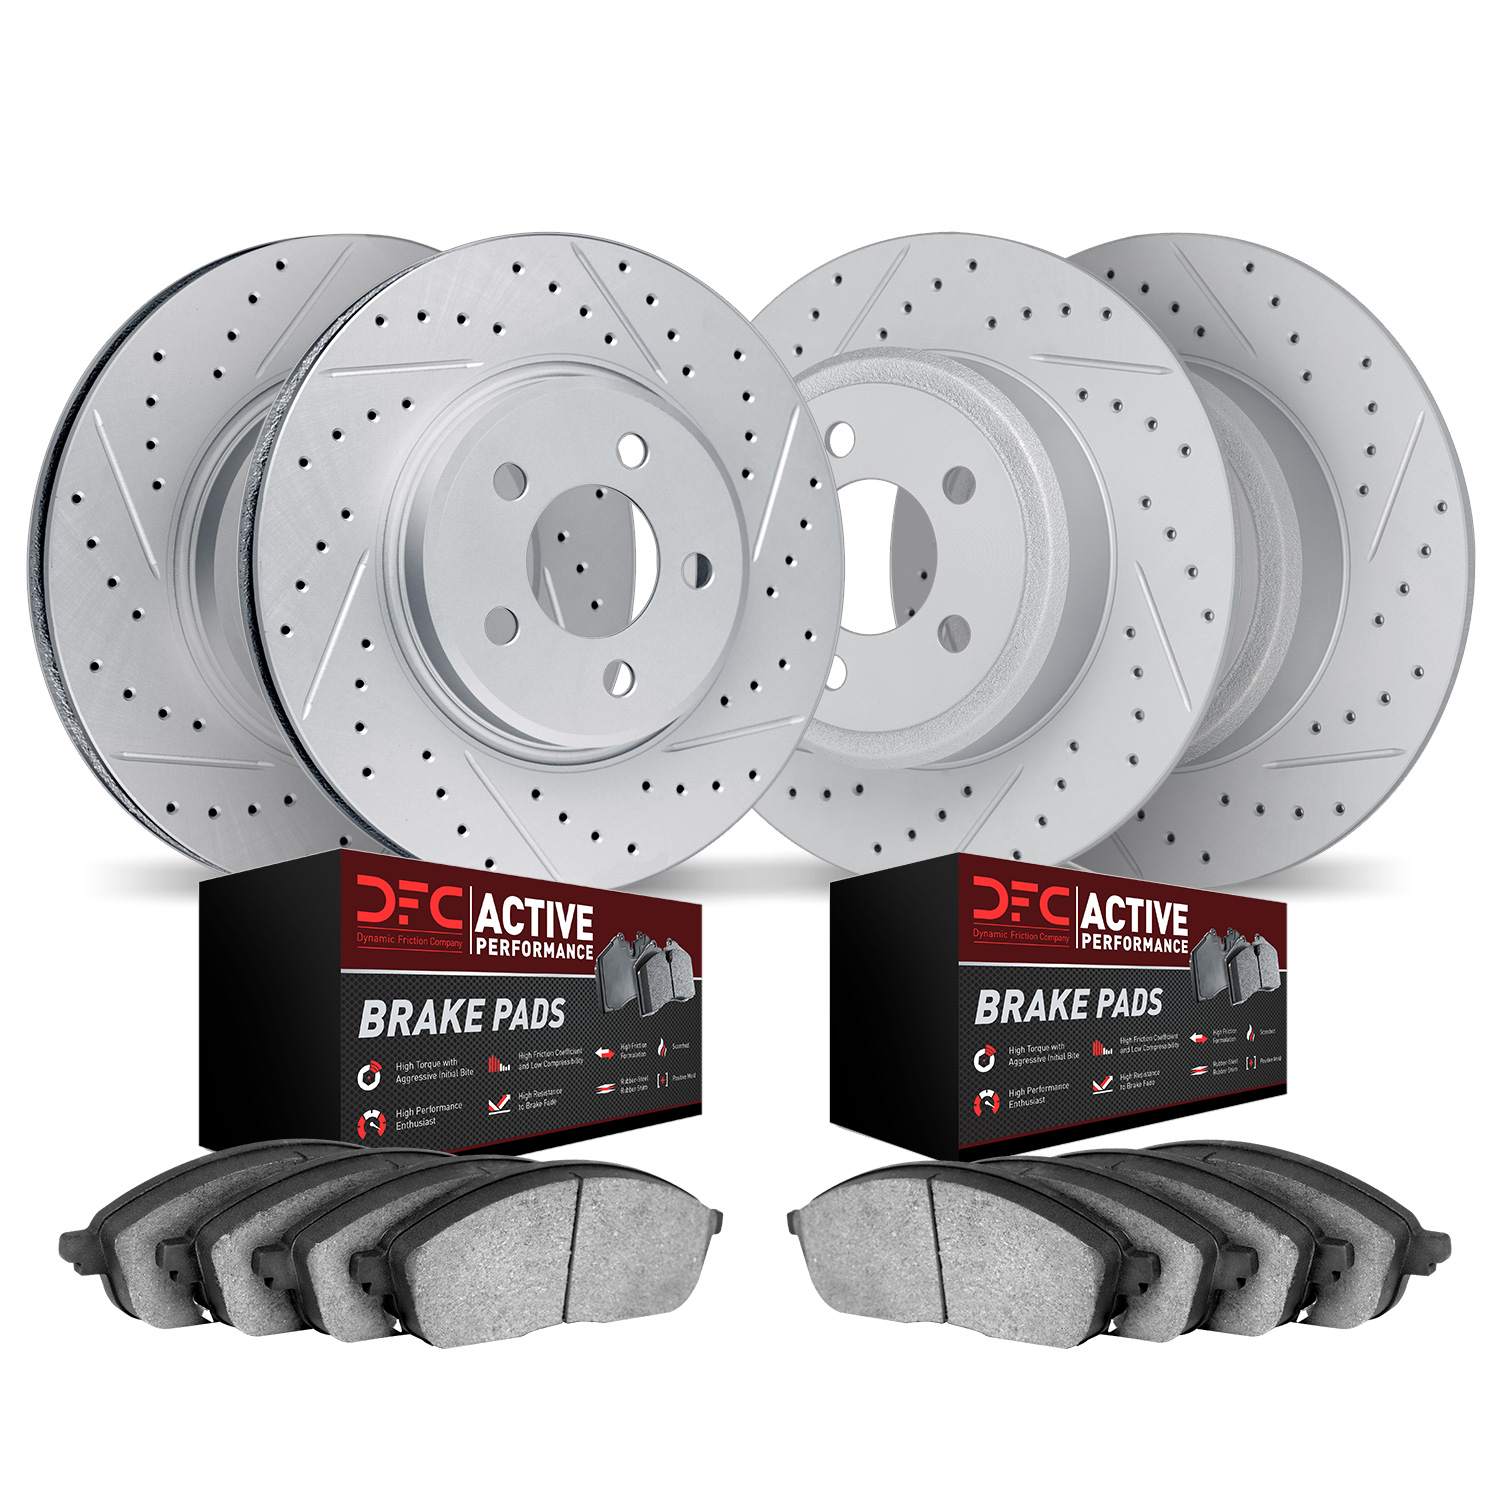 2704-75000 Geoperformance Drilled/Slotted Brake Rotors with Active Performance Pads Kit, 1998-2010 Lexus/Toyota/Scion, Position: